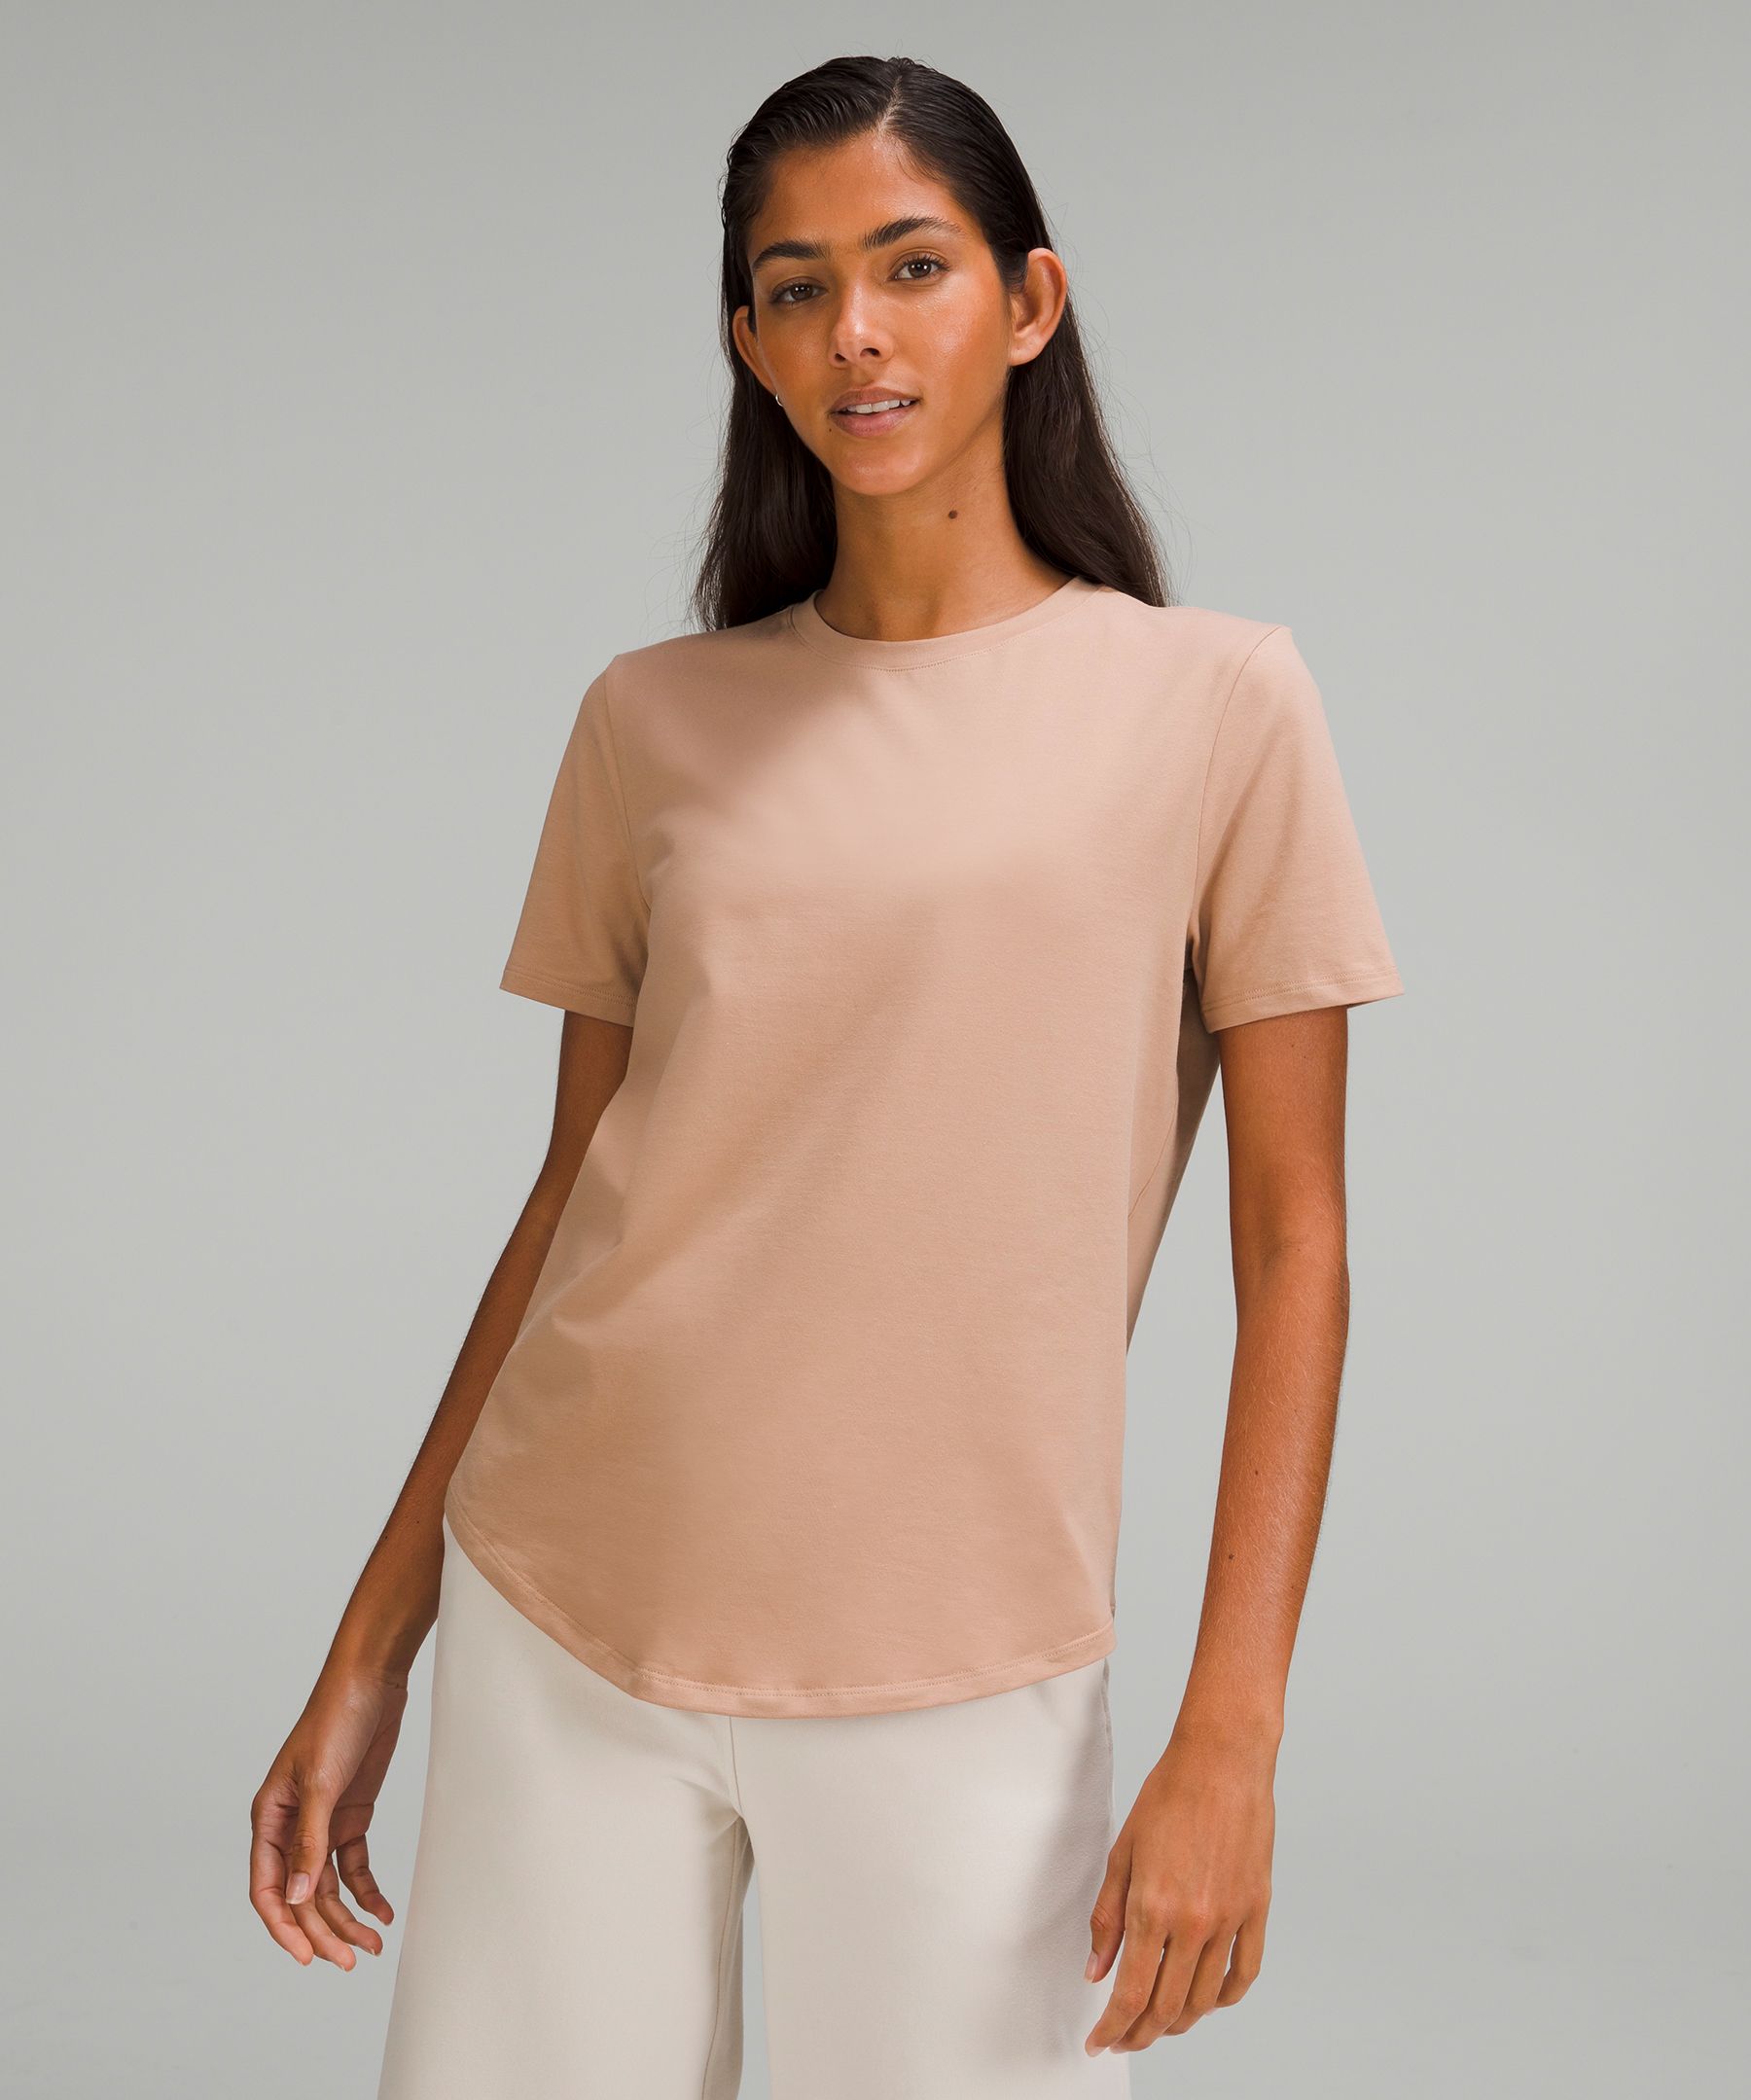 Lululemon Love Crew T-shirt In Pink Clay